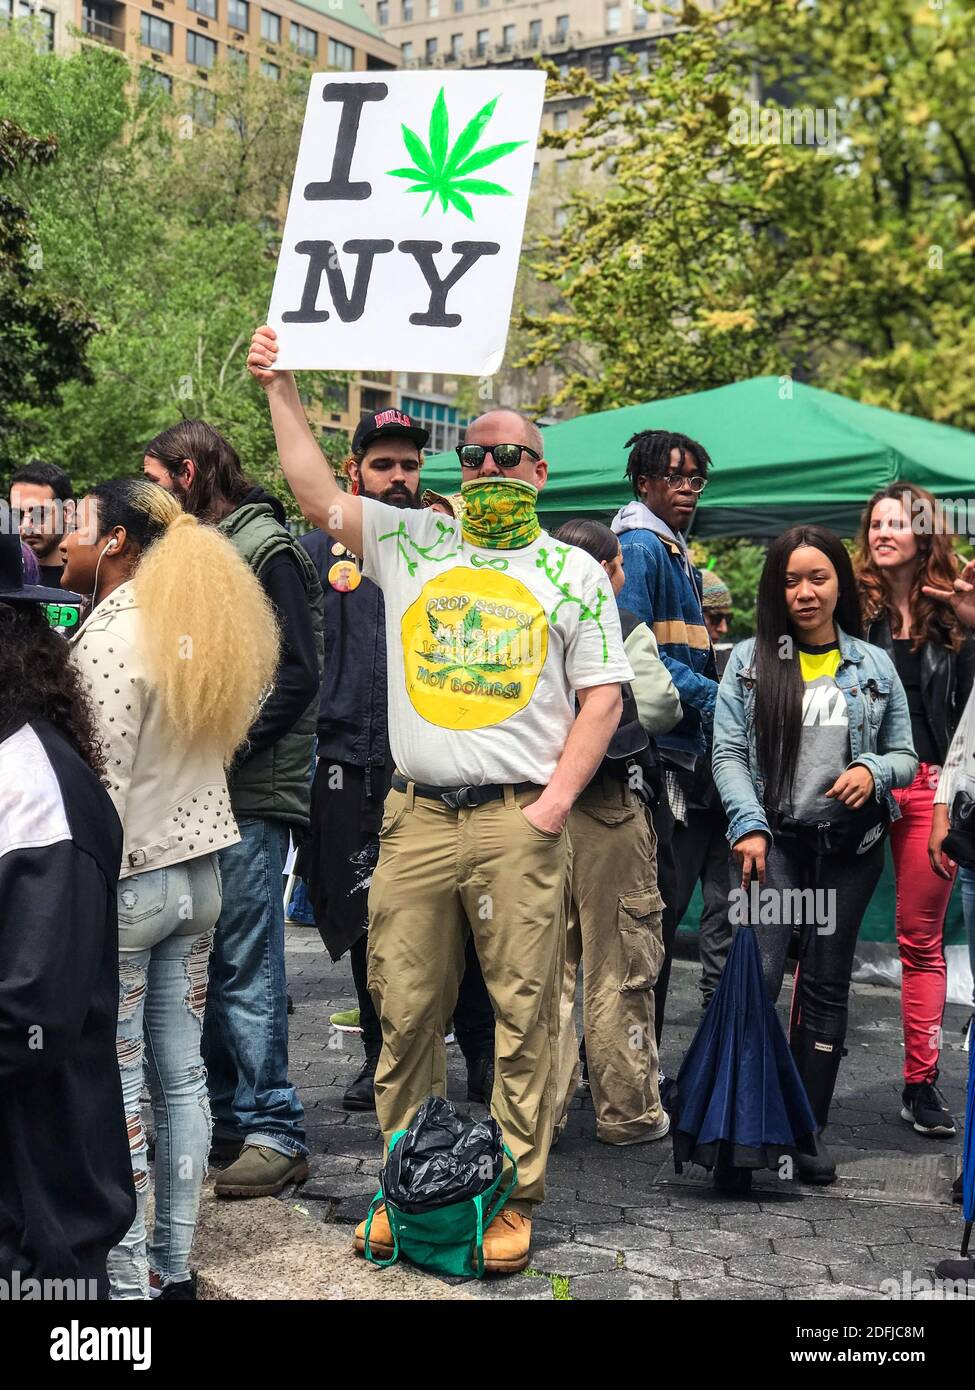 New York, NY, USA - May 4, 2019:  A person holds a sign that says 'I love New York' with a marijuana leaf in place of the heart symbol. Stock Photo